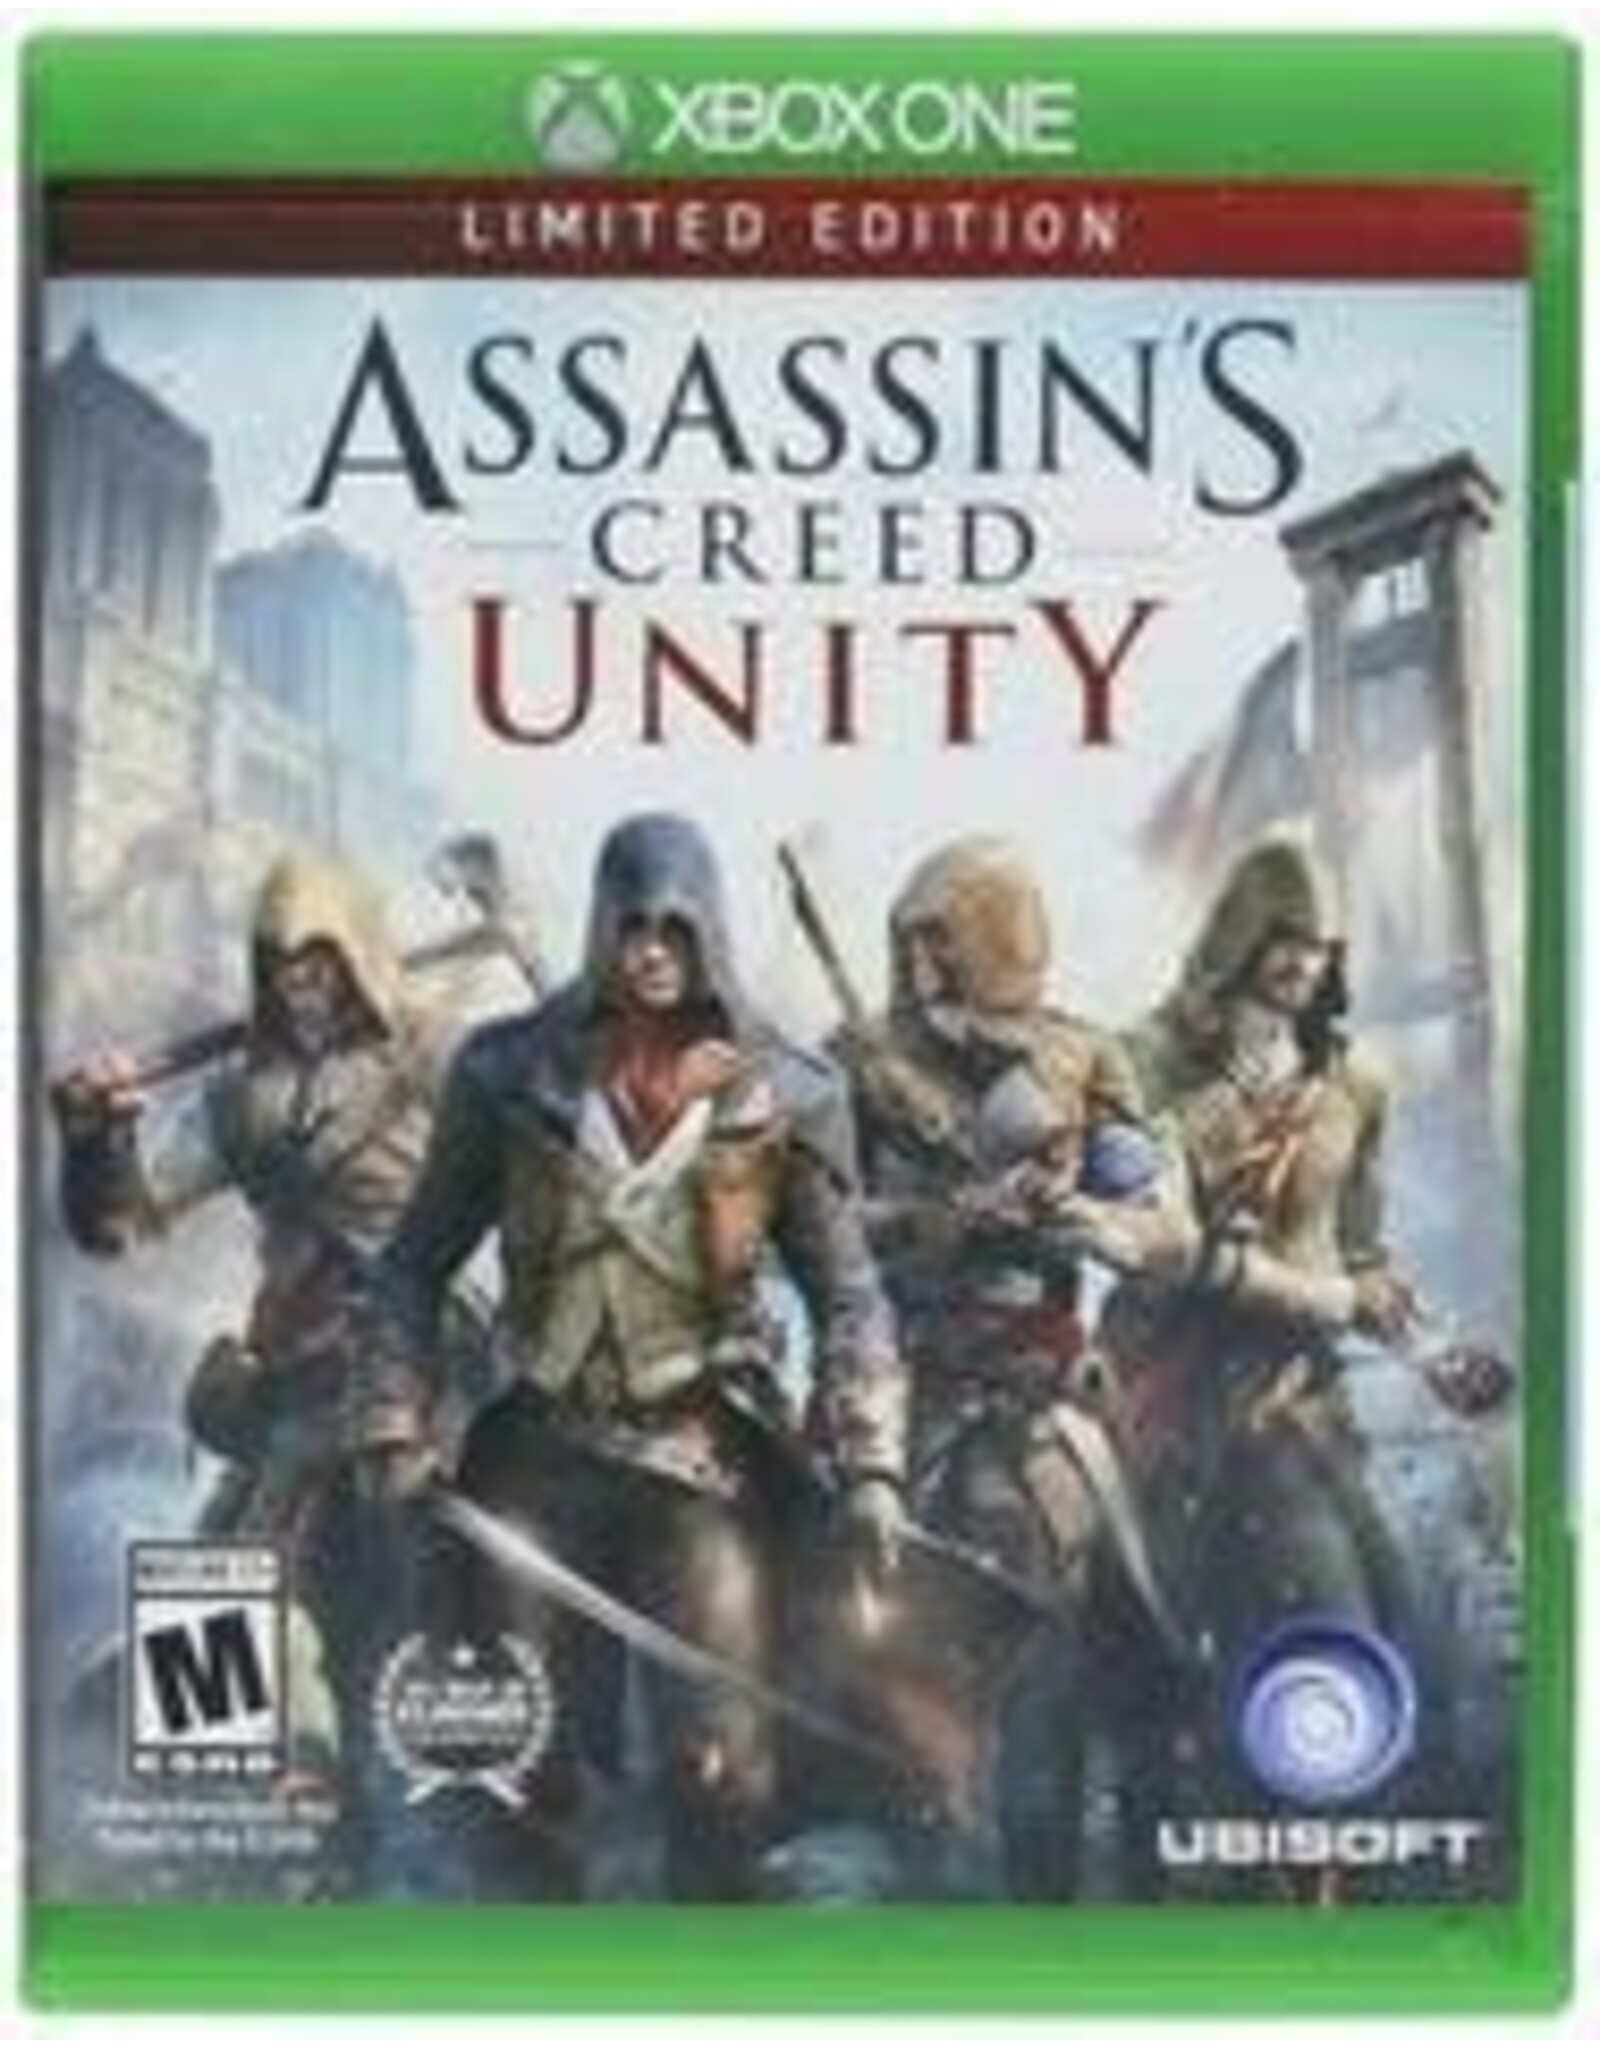 Xbox One Assassin's Creed Unity Limited Edition - NO DLC (Used)